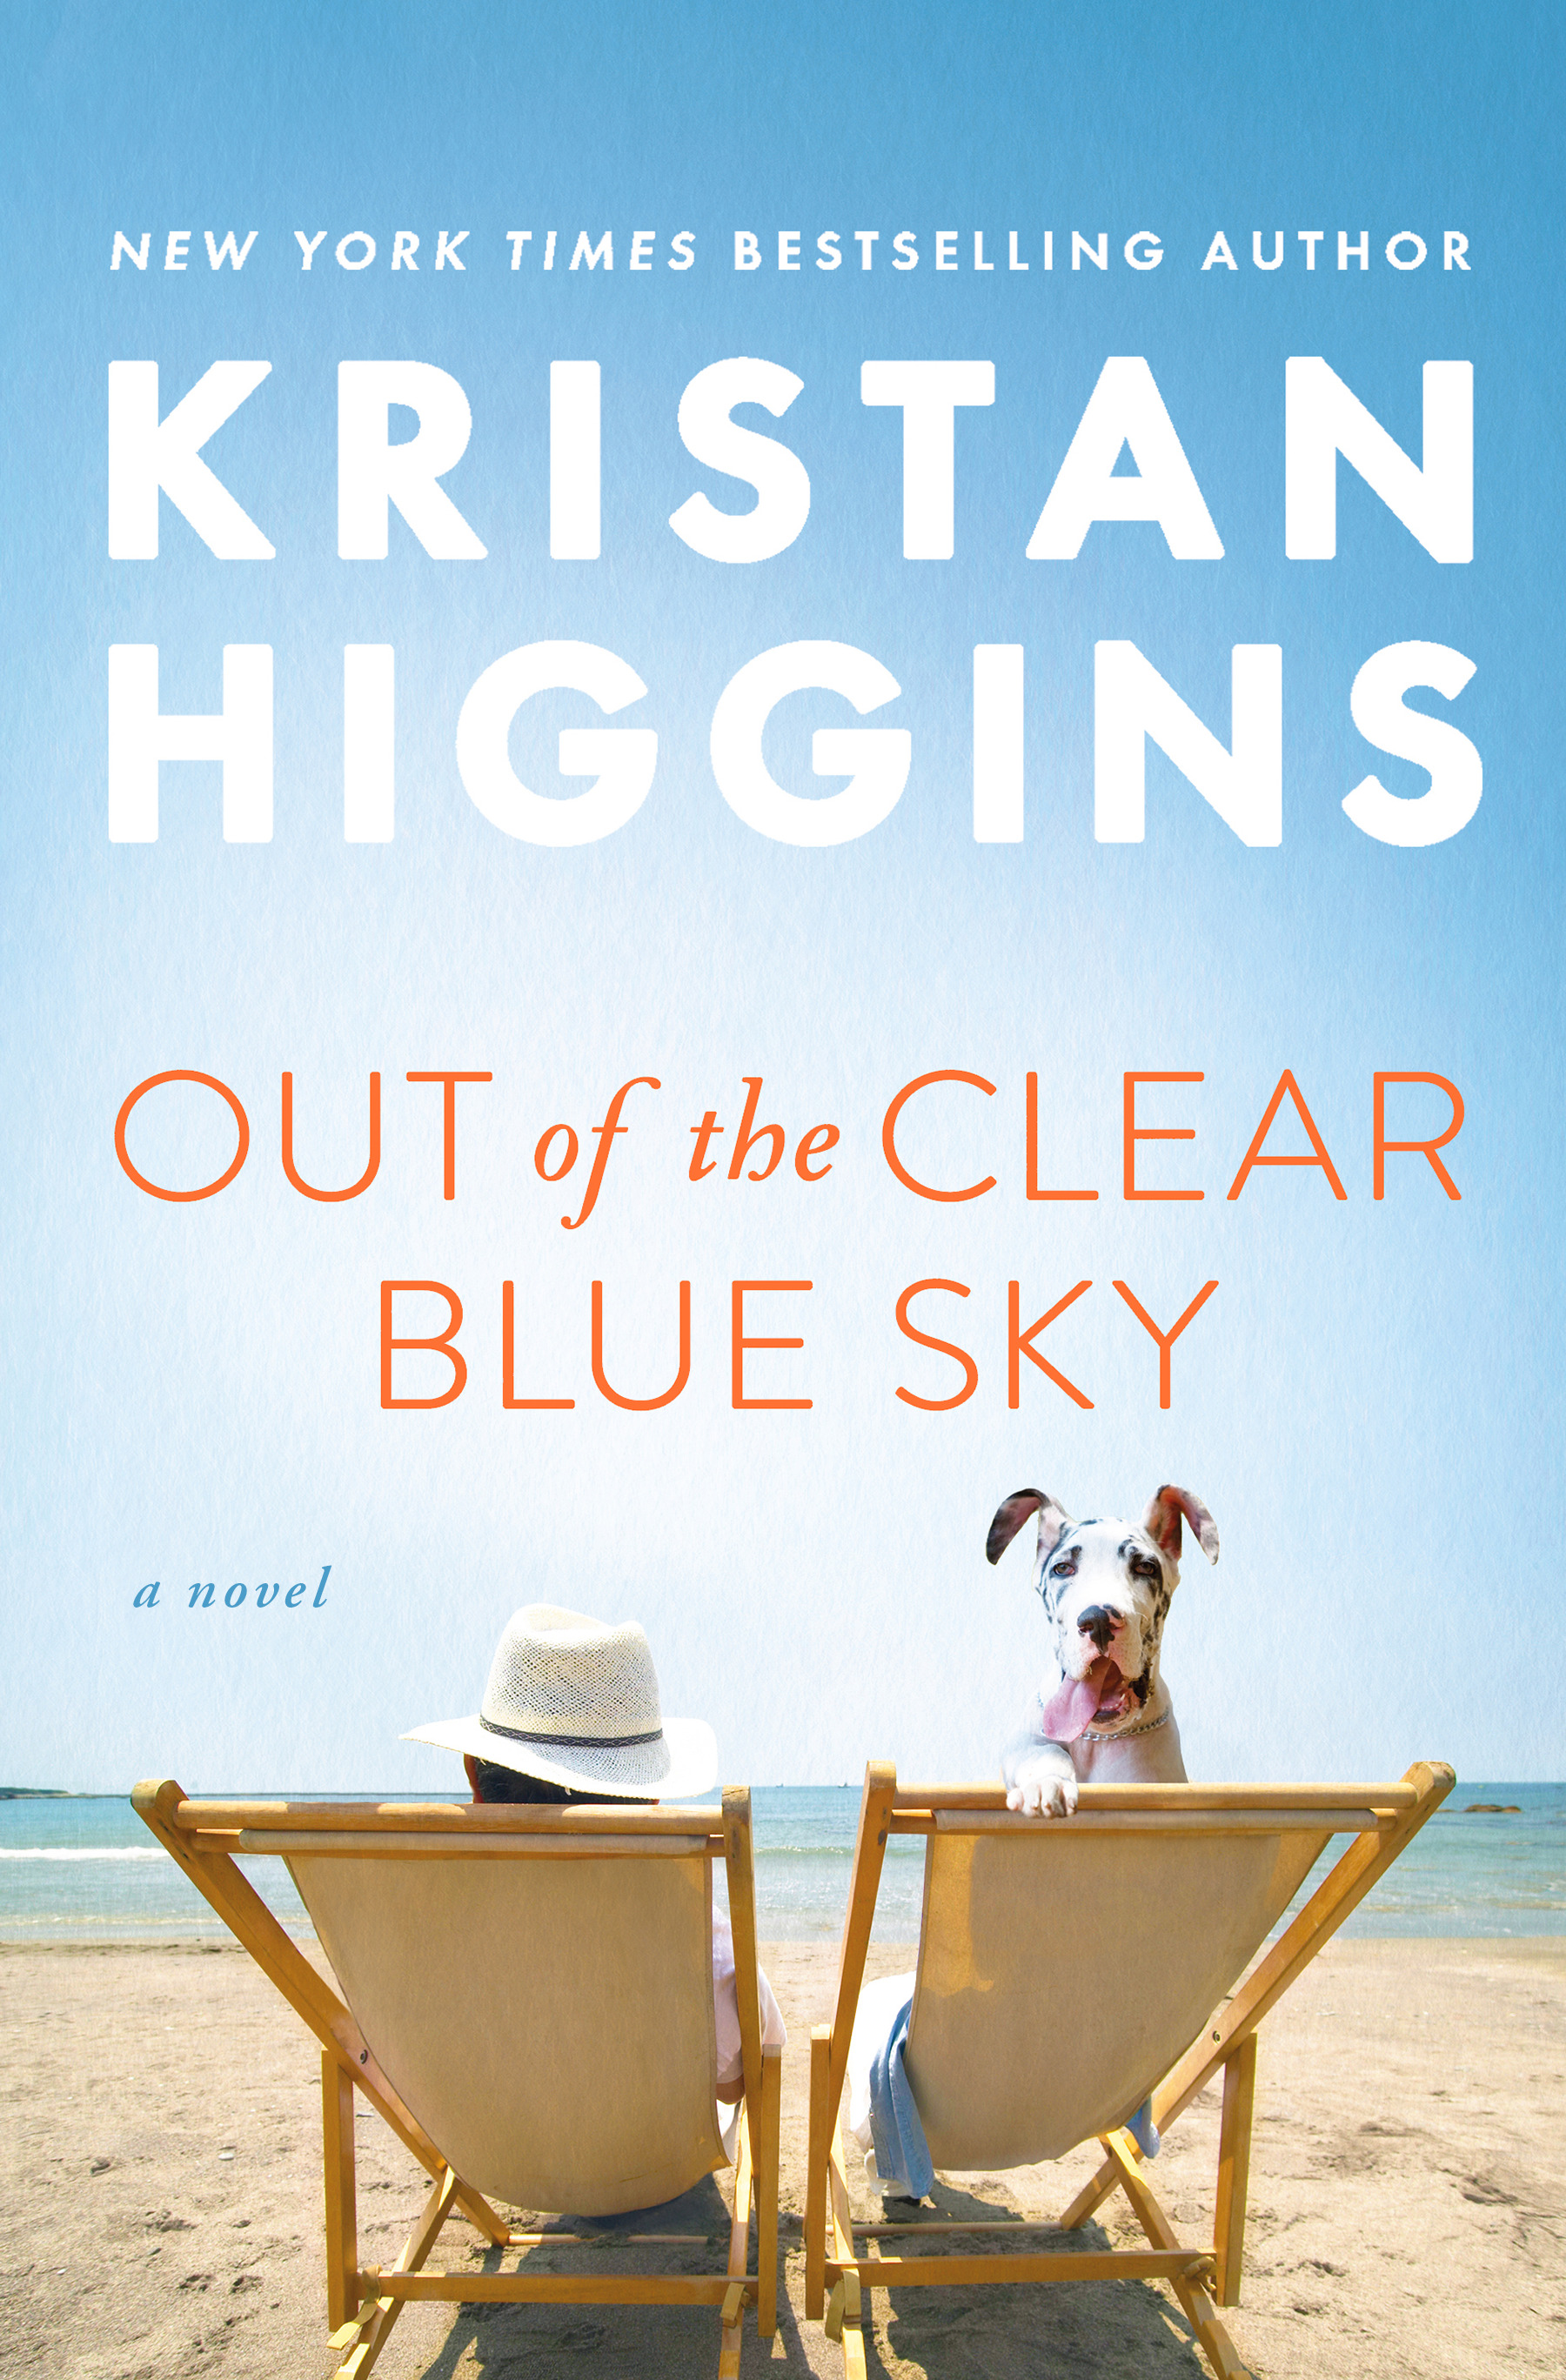 Image for "Out of the Clear Blue Sky"